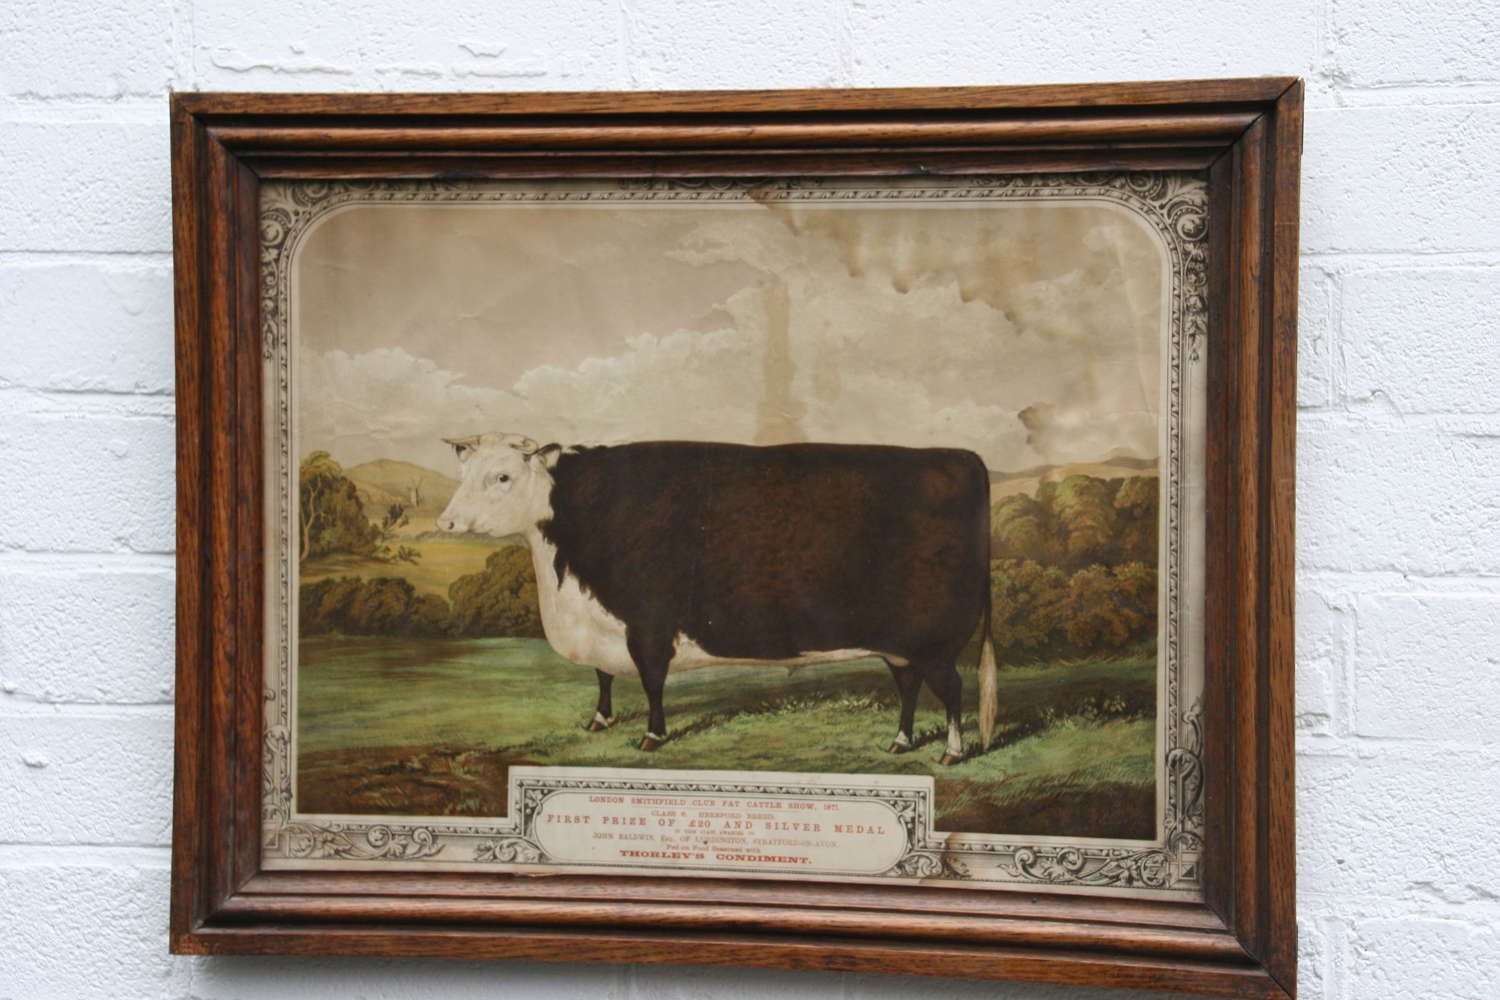 Naive Bull pictorial framed advertising Print Thorley's food